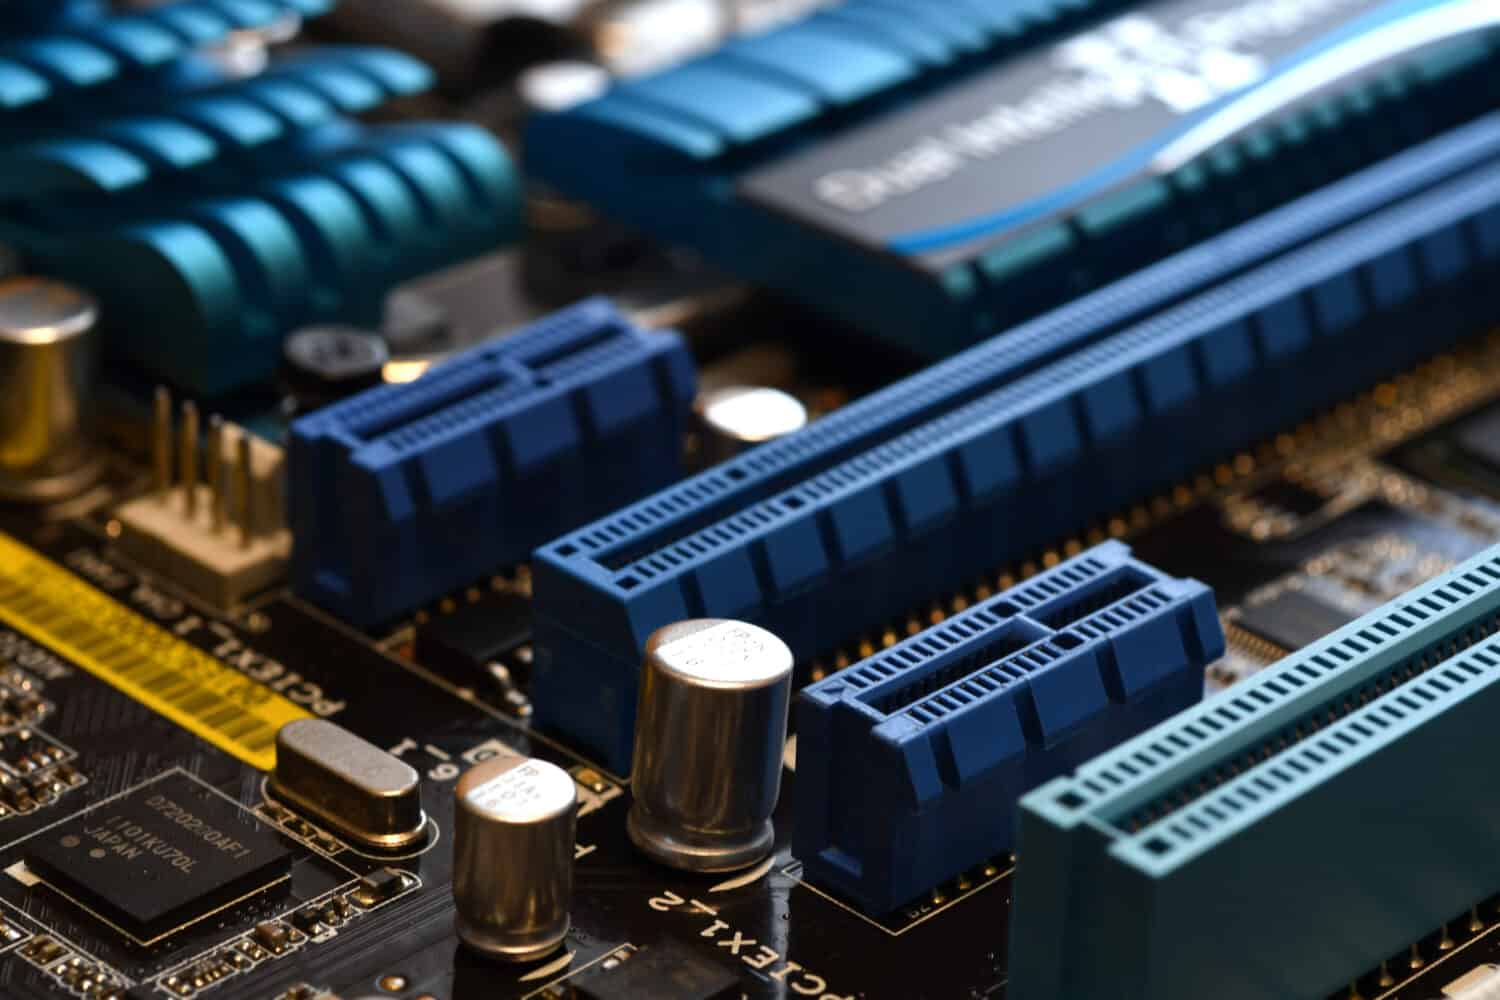 Motherboard with blue PCI-express slot, close-up and selective focusing